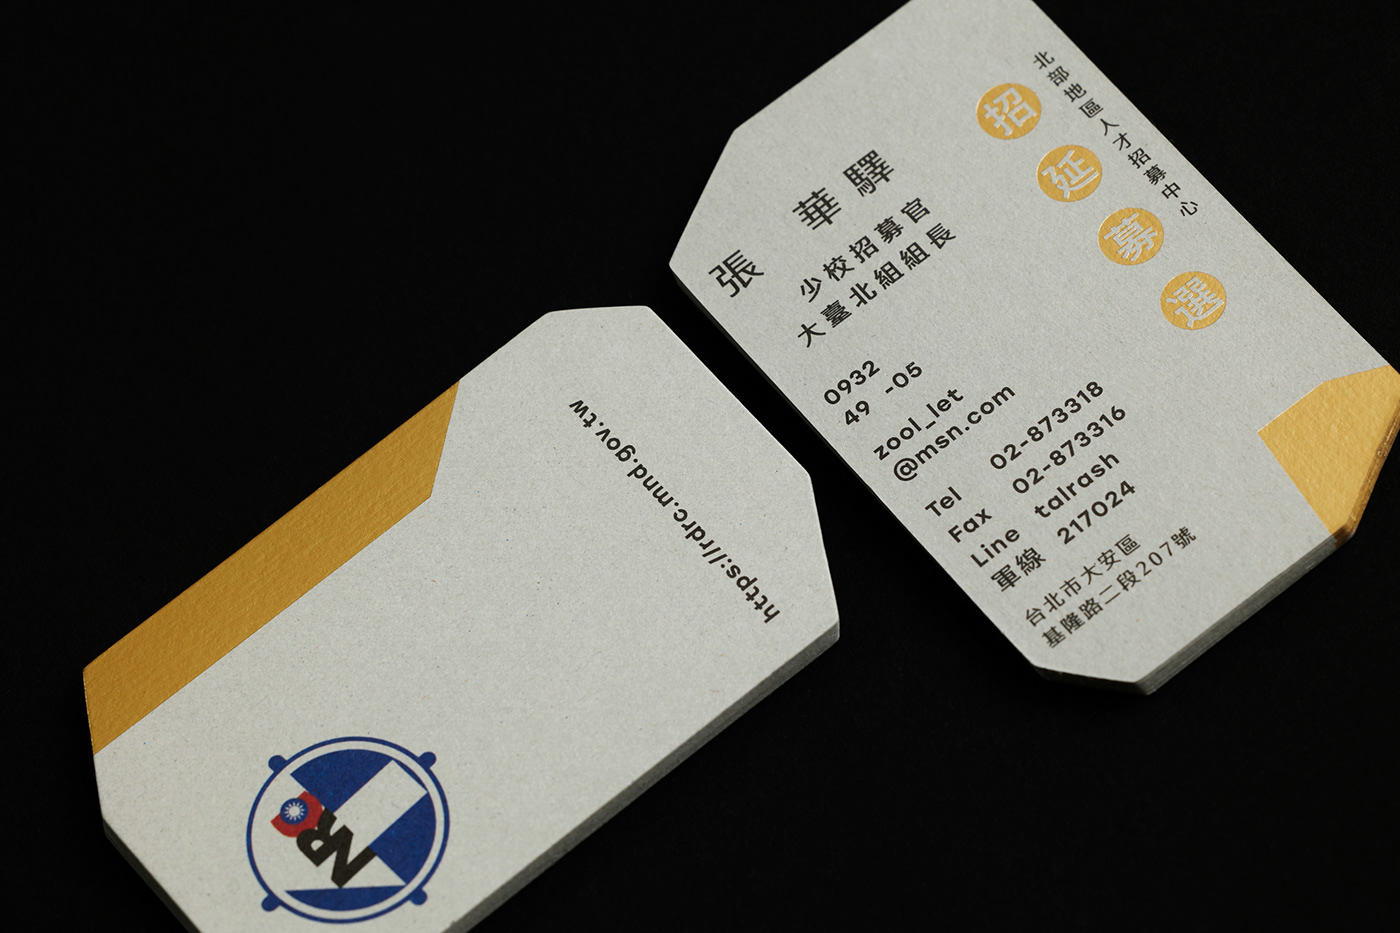 armed business card center enlist forces gold hot stamping paper recycled paper soldier